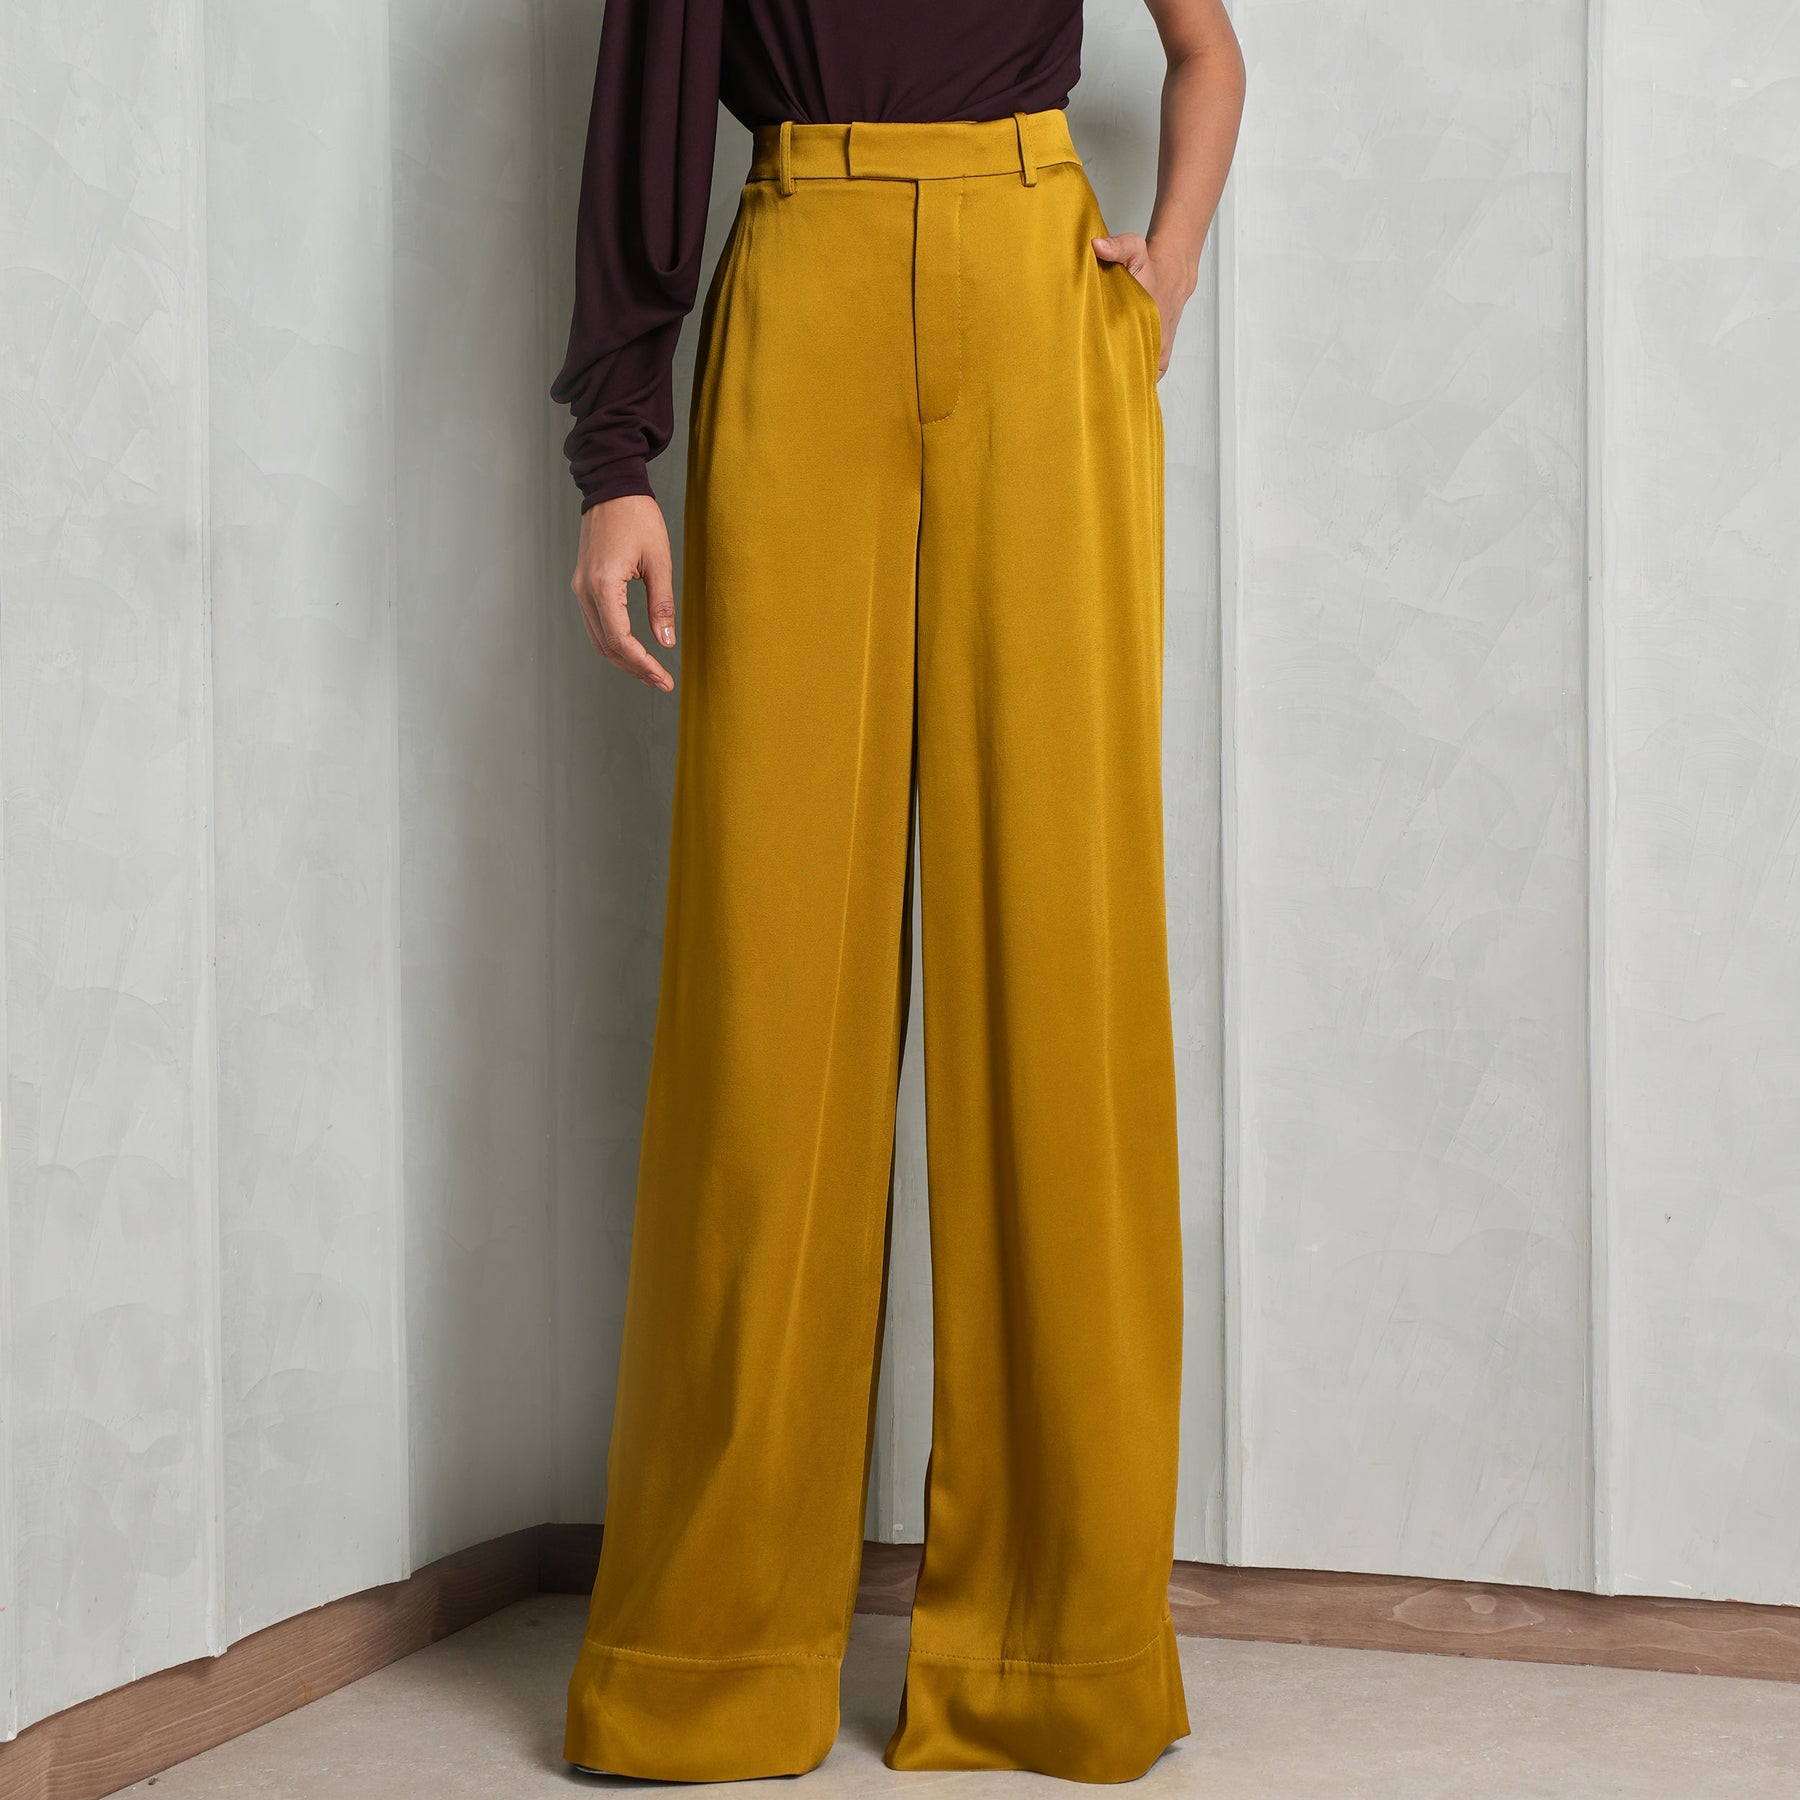 Buy Linen Palazzo Pants, Wide Leg Trousers, Woman Skirt Pants, High Waisted  Linen Trousers, Extra Loose Urban Clothing by Friends Fashion Online in  India - Etsy